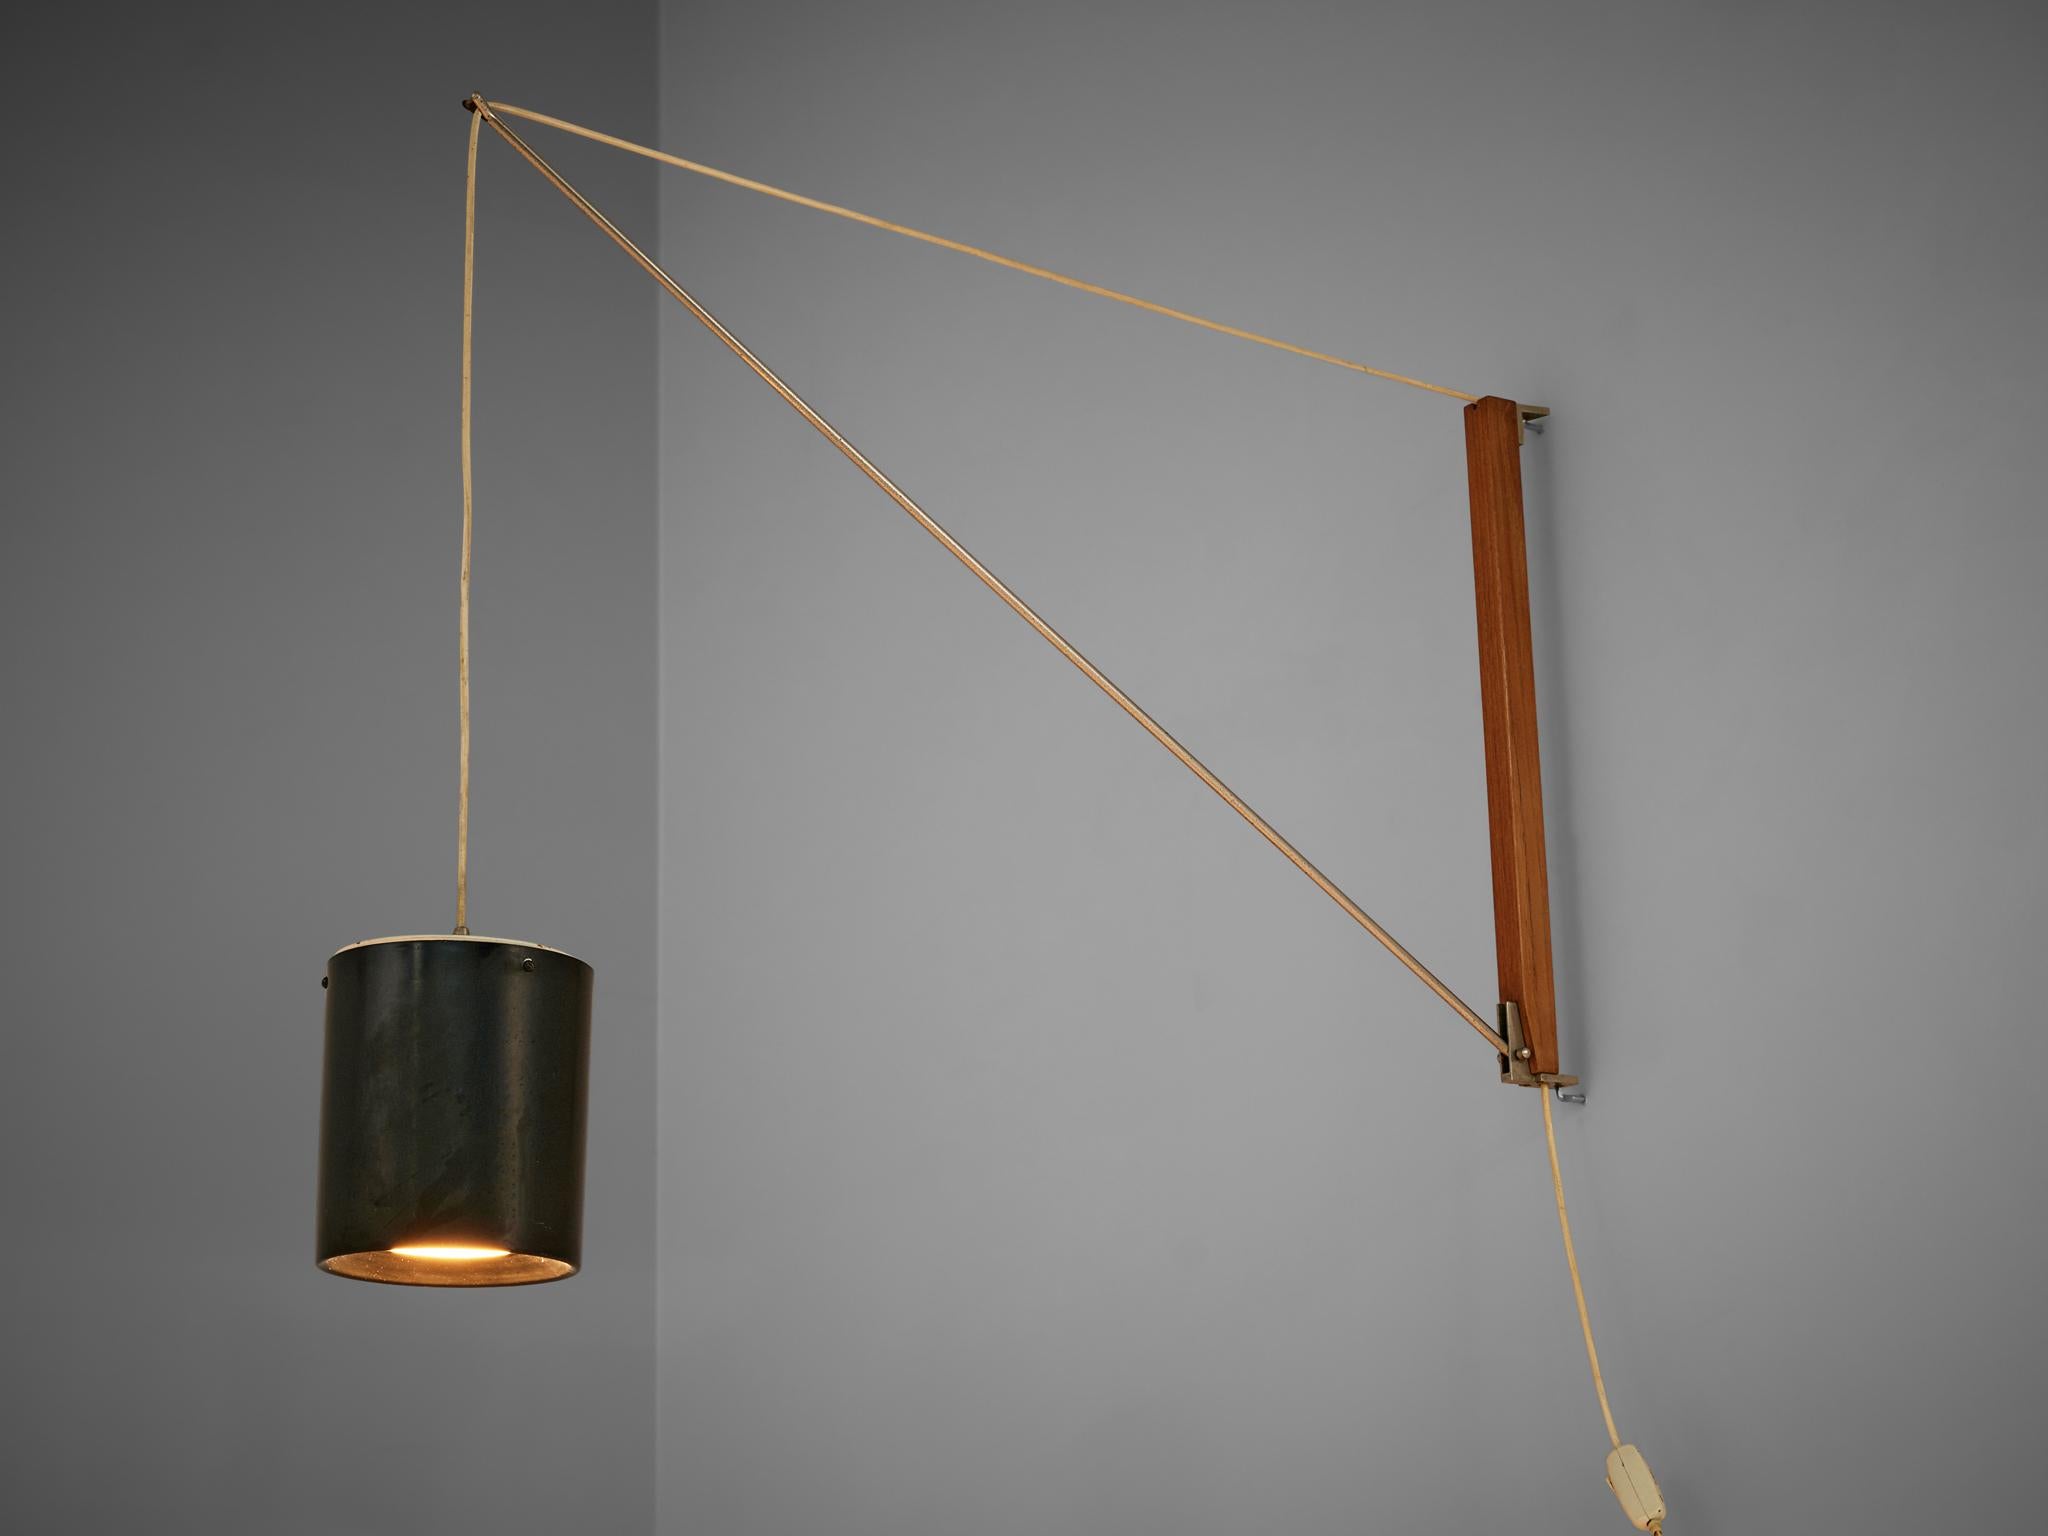 Willem Hagoort, 'Arc' wall light, teak, metal, The Netherlands, 1950s

Arc wall lamp designed by Dutch designer Willem Hagoort in the 1950s. The teak wall mount and nickel plated arm are adjustable in height and direction by an ingenious balanced